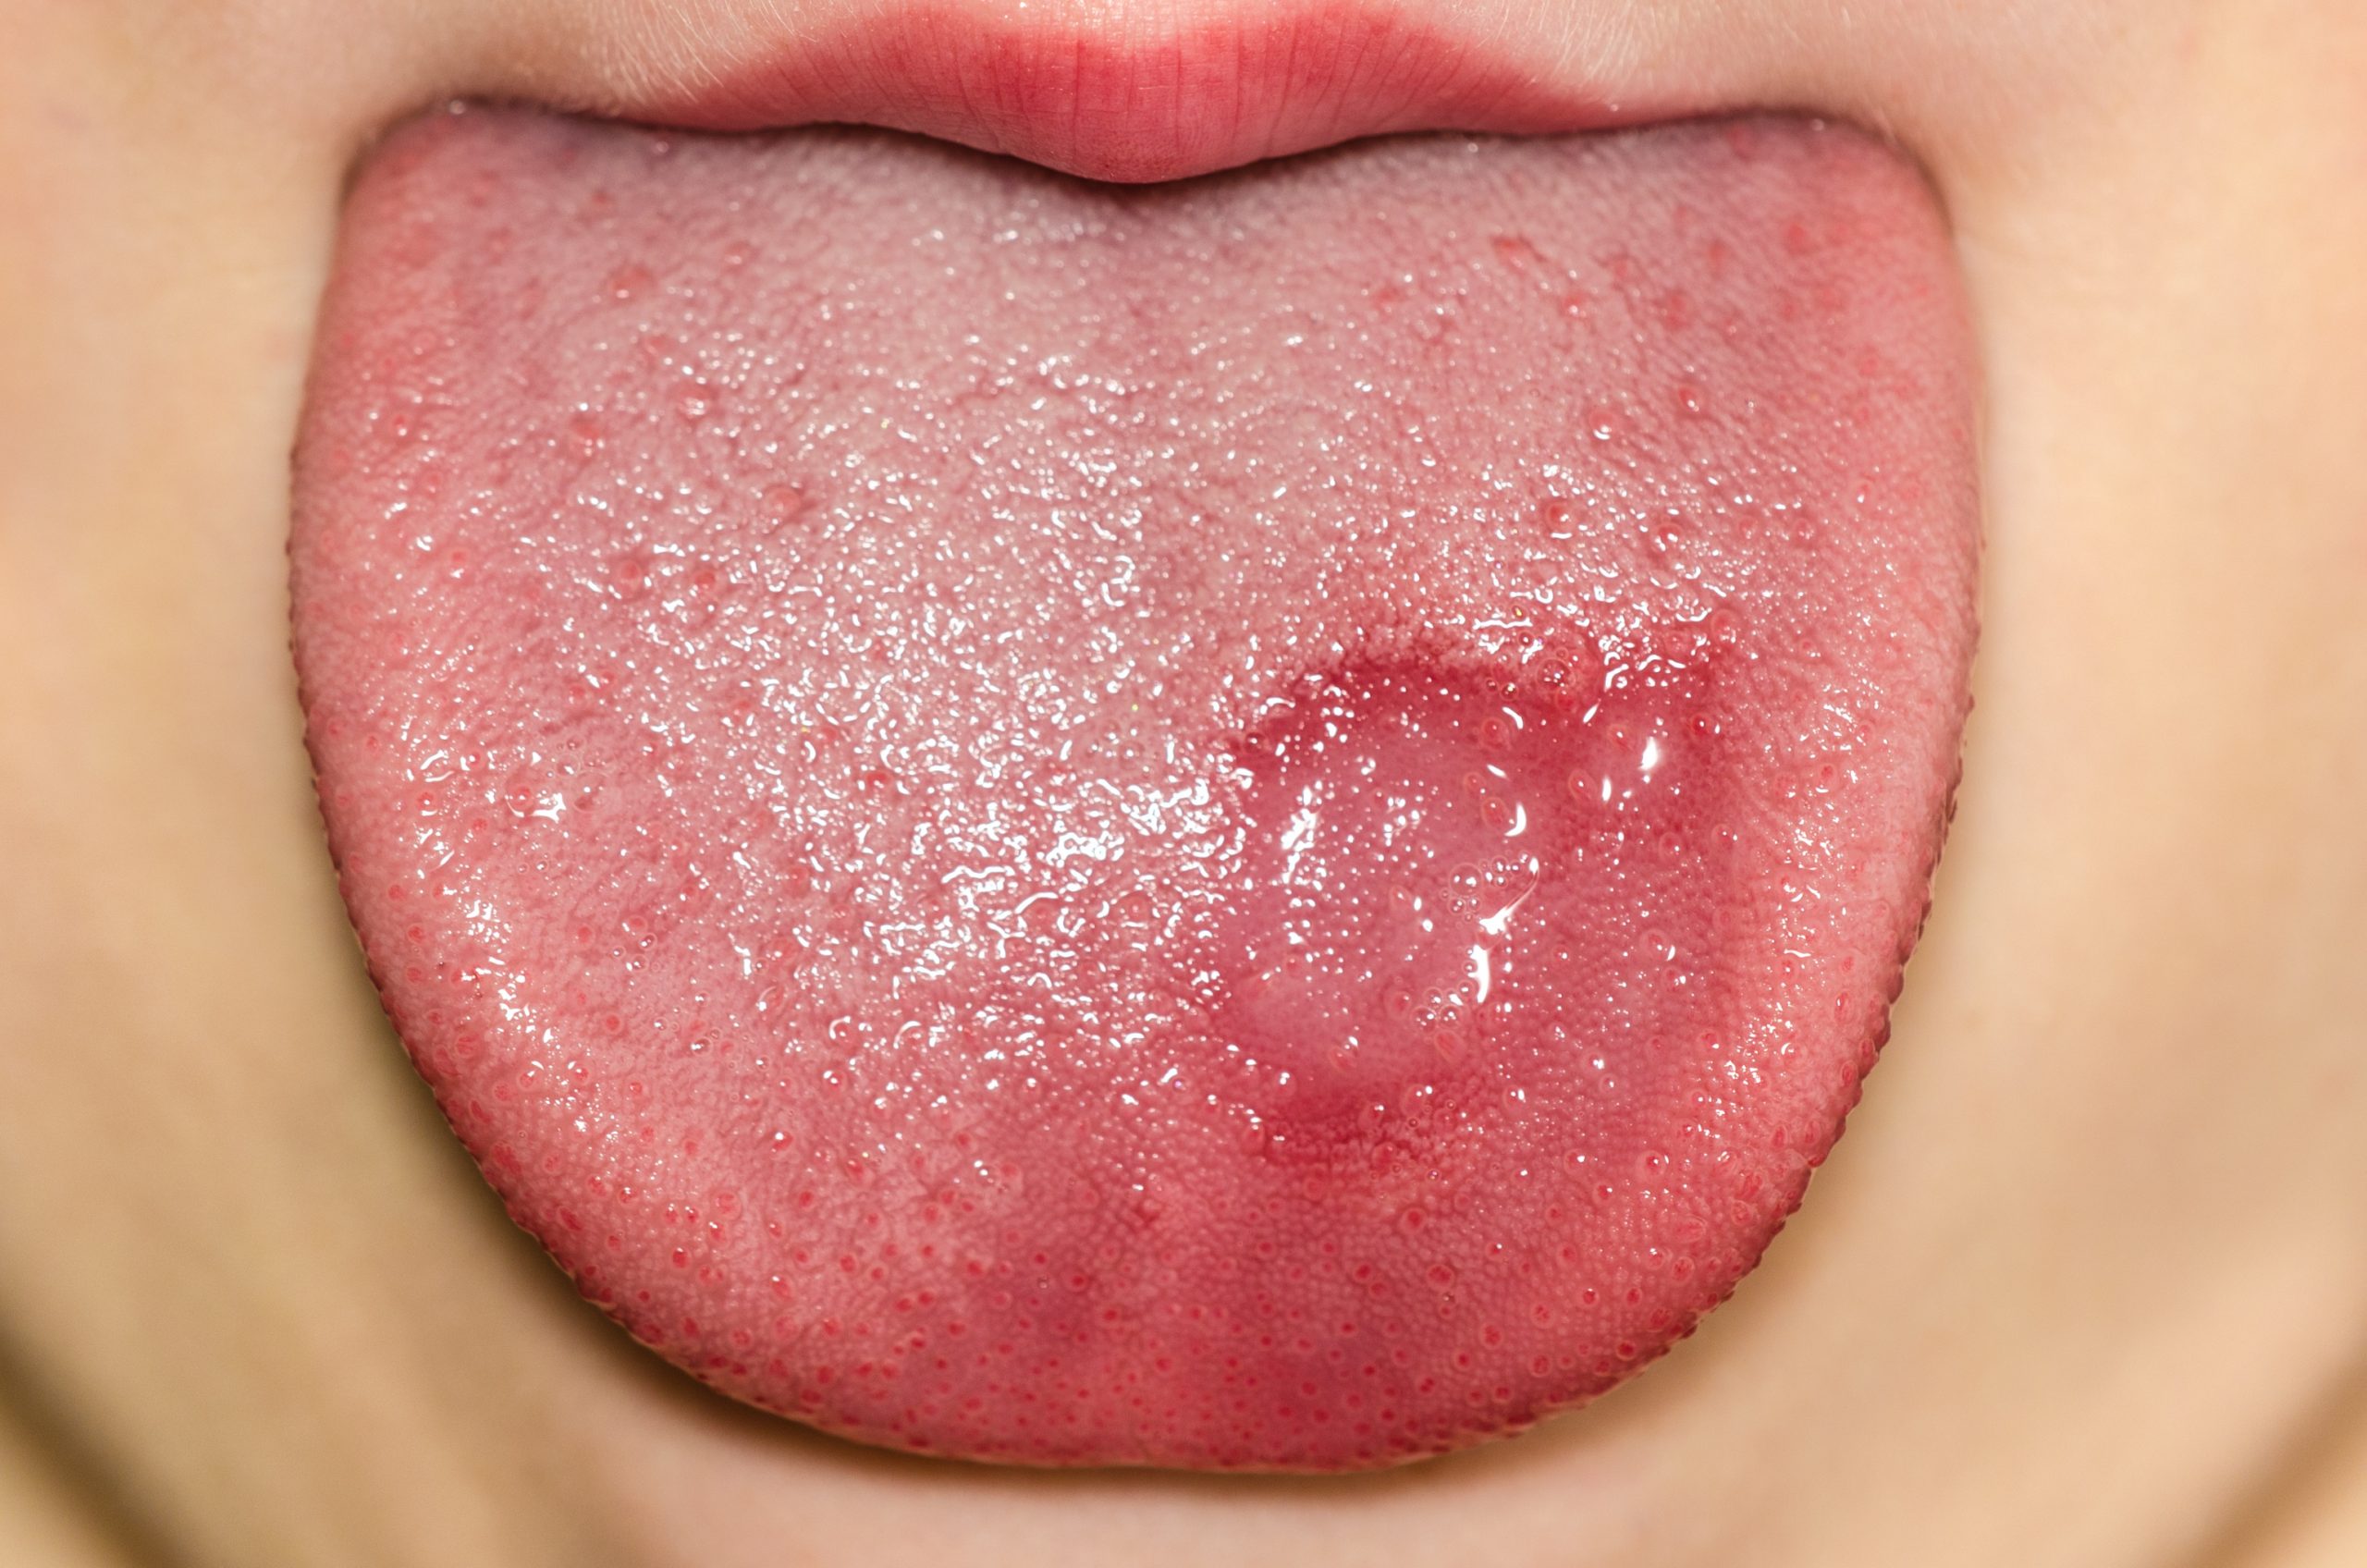 Geographic tongue disease on a caucasian child